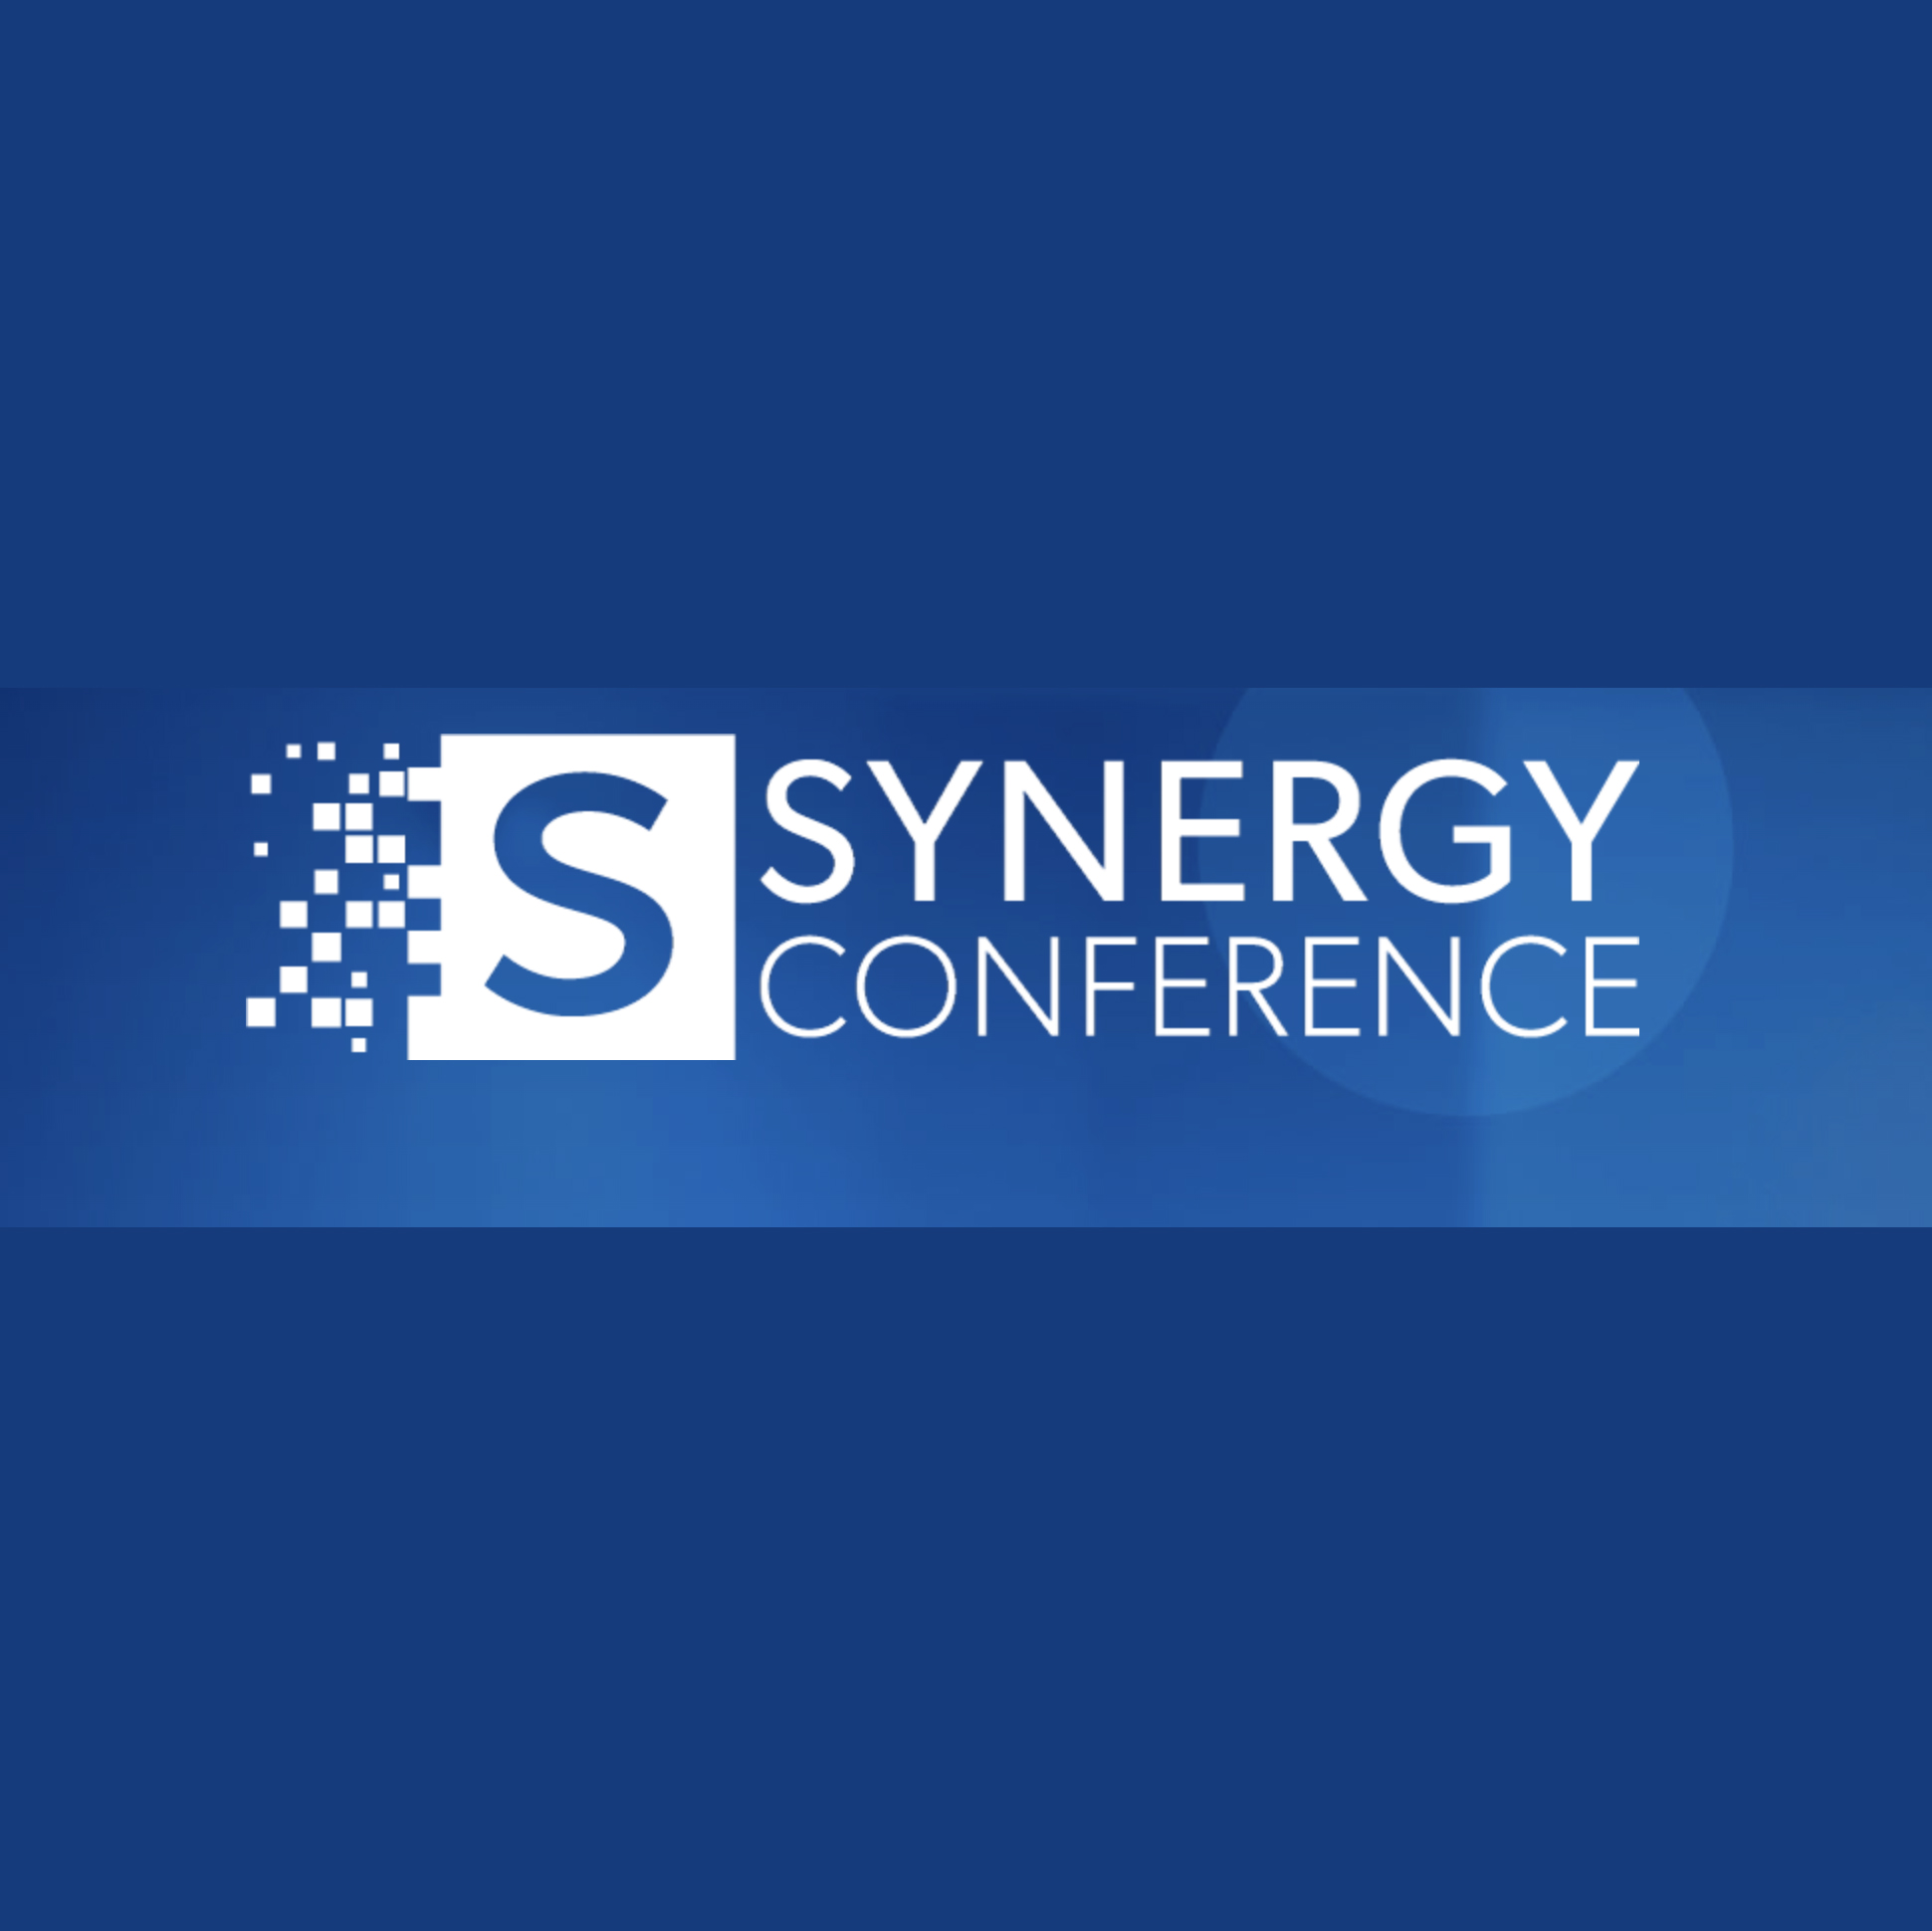 Synergy Conference